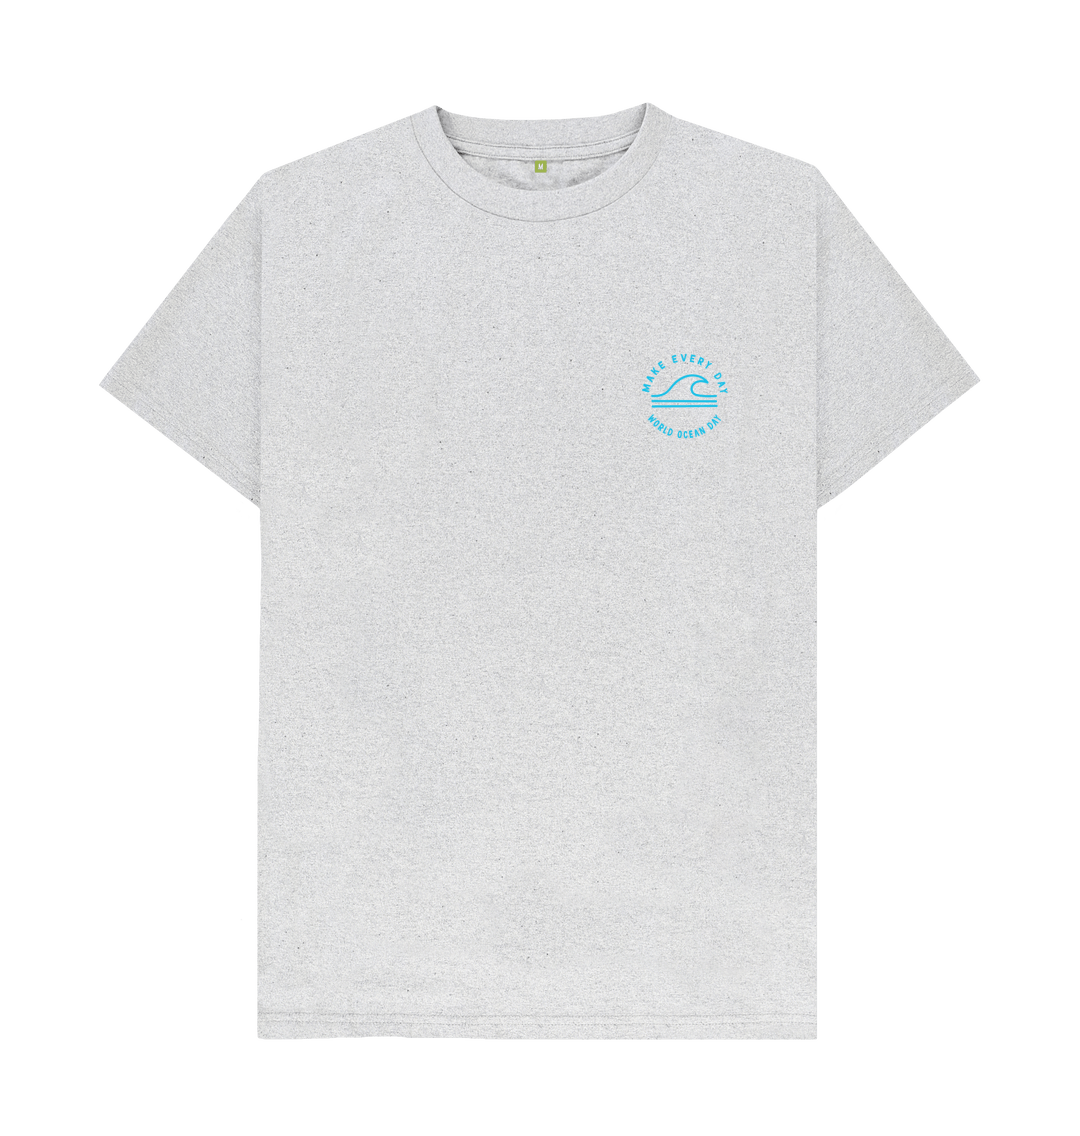 Recycled World Ocean Day T-shirt